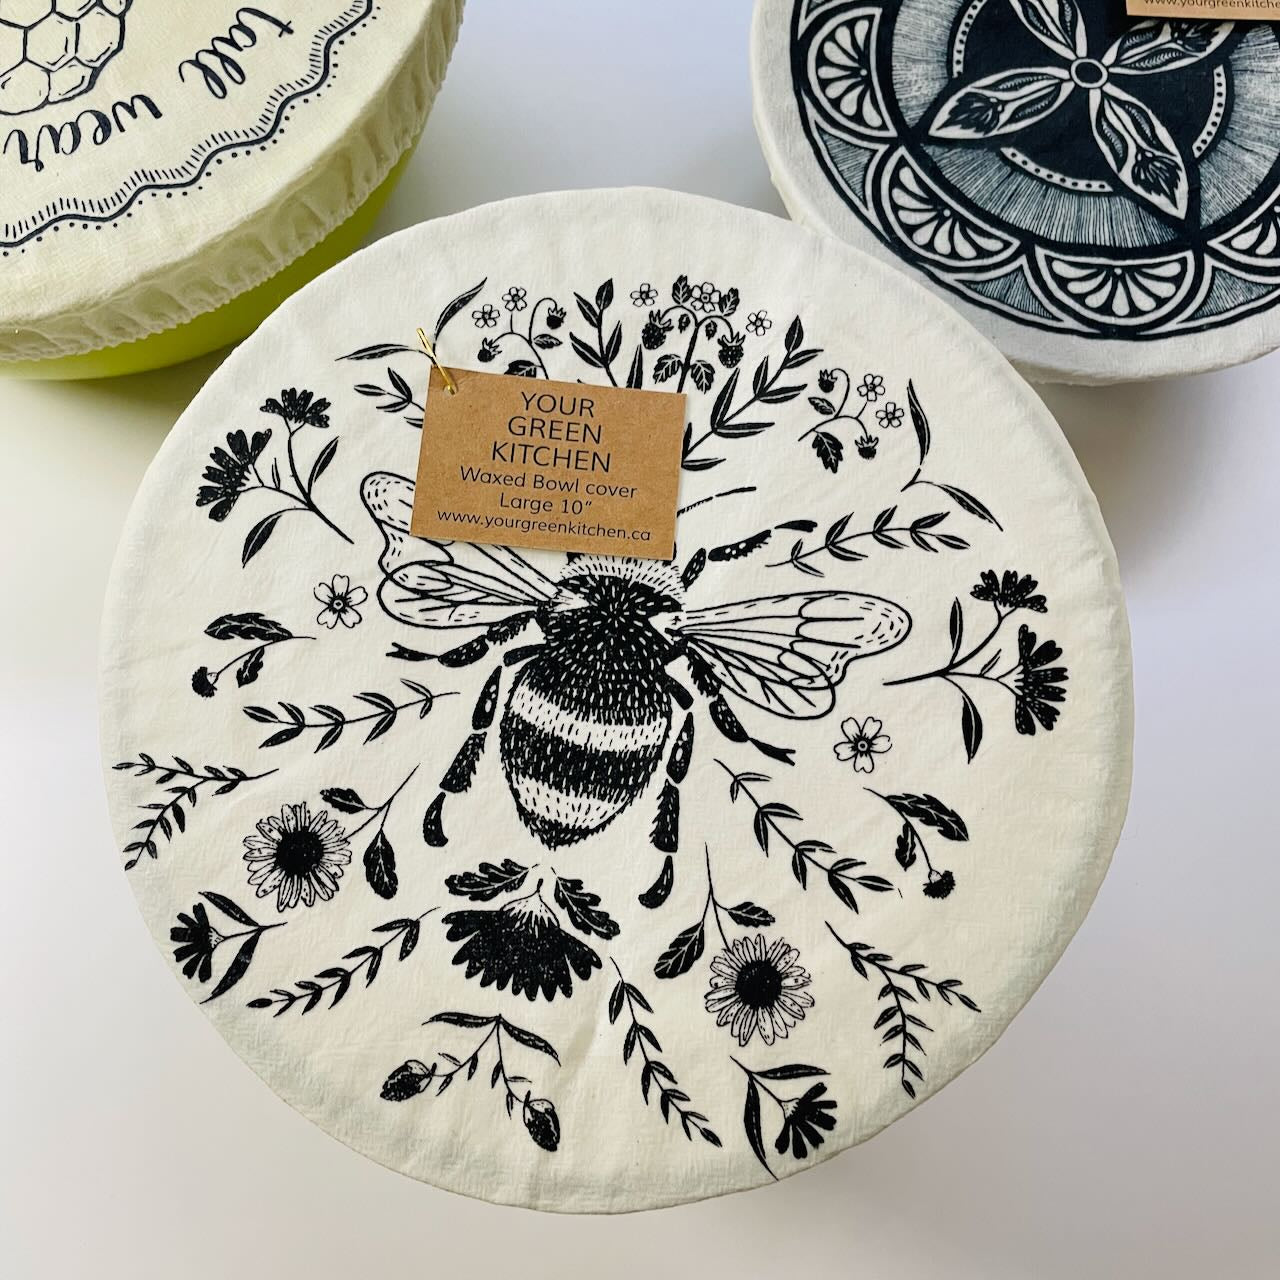 Waxed Reusable Fabric Bowl Cover: Charcoal Bee - Large 10"